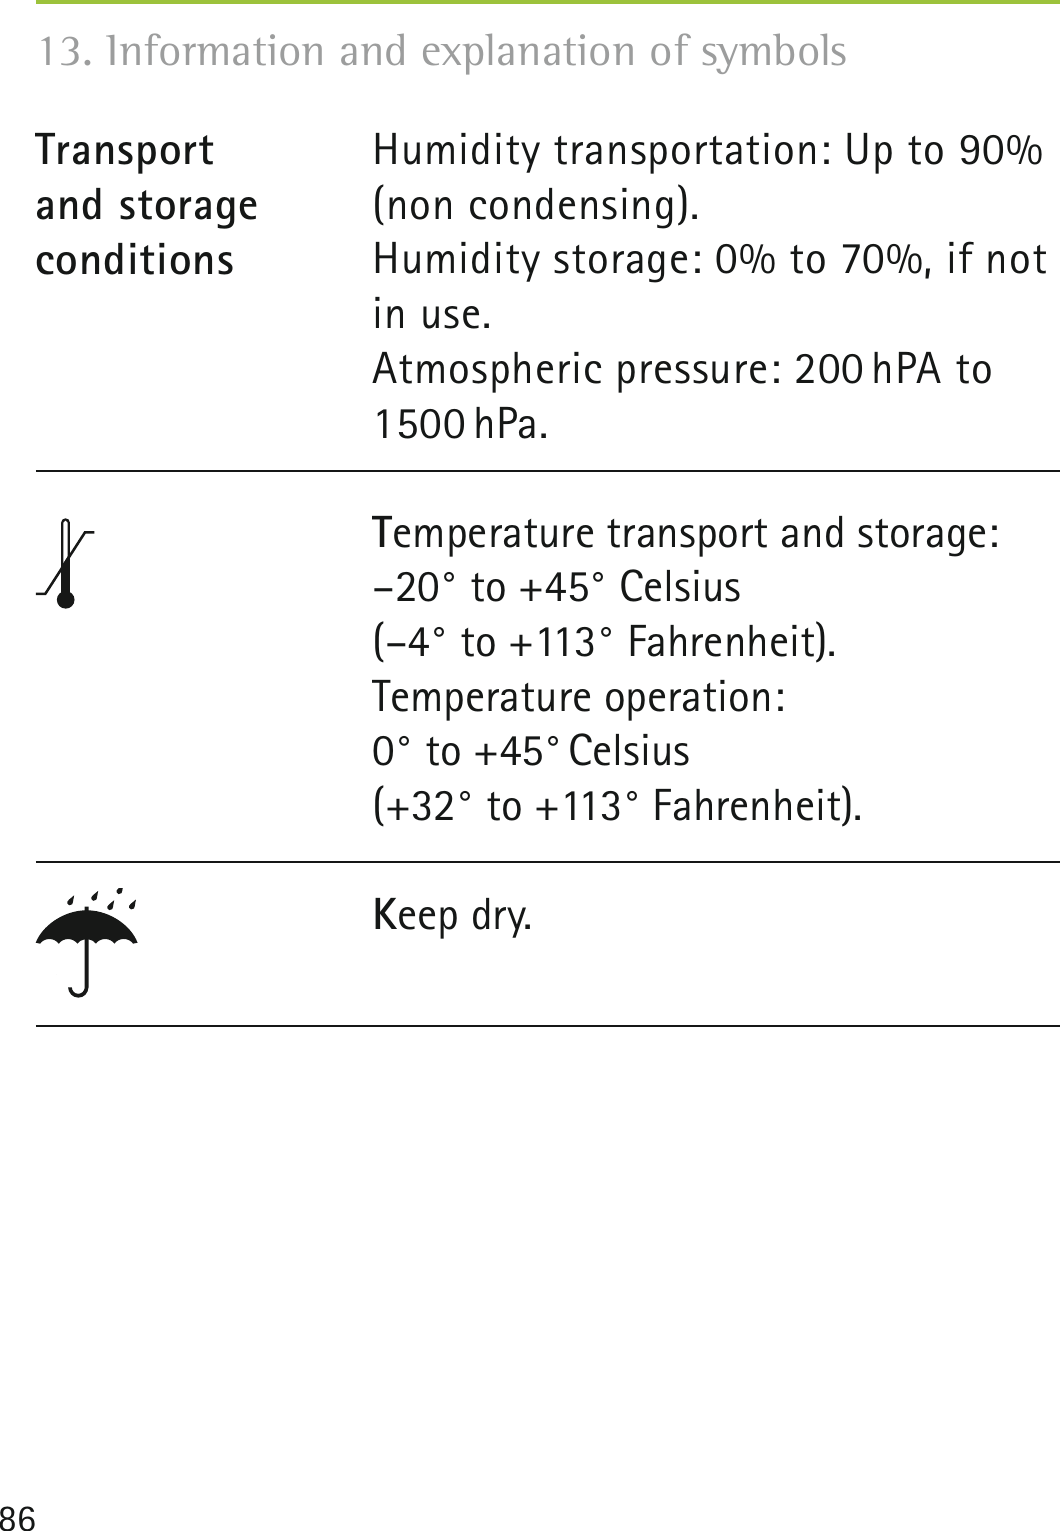 86Humidity transportation: Up to 90%(non condensing).Humidity storage: 0% to 70%, if notin use.Atmospheric pressure: 200 hPA to1500 hPa.Transport and storage conditions13. Information and explanation of symbolsKeep dry. Temperature transport and storage: –20° to +45° Celsius  (–4° to +113° Fahrenheit). Temperature operation:  0° to +45° Celsius  (+32° to +113° Fahrenheit).